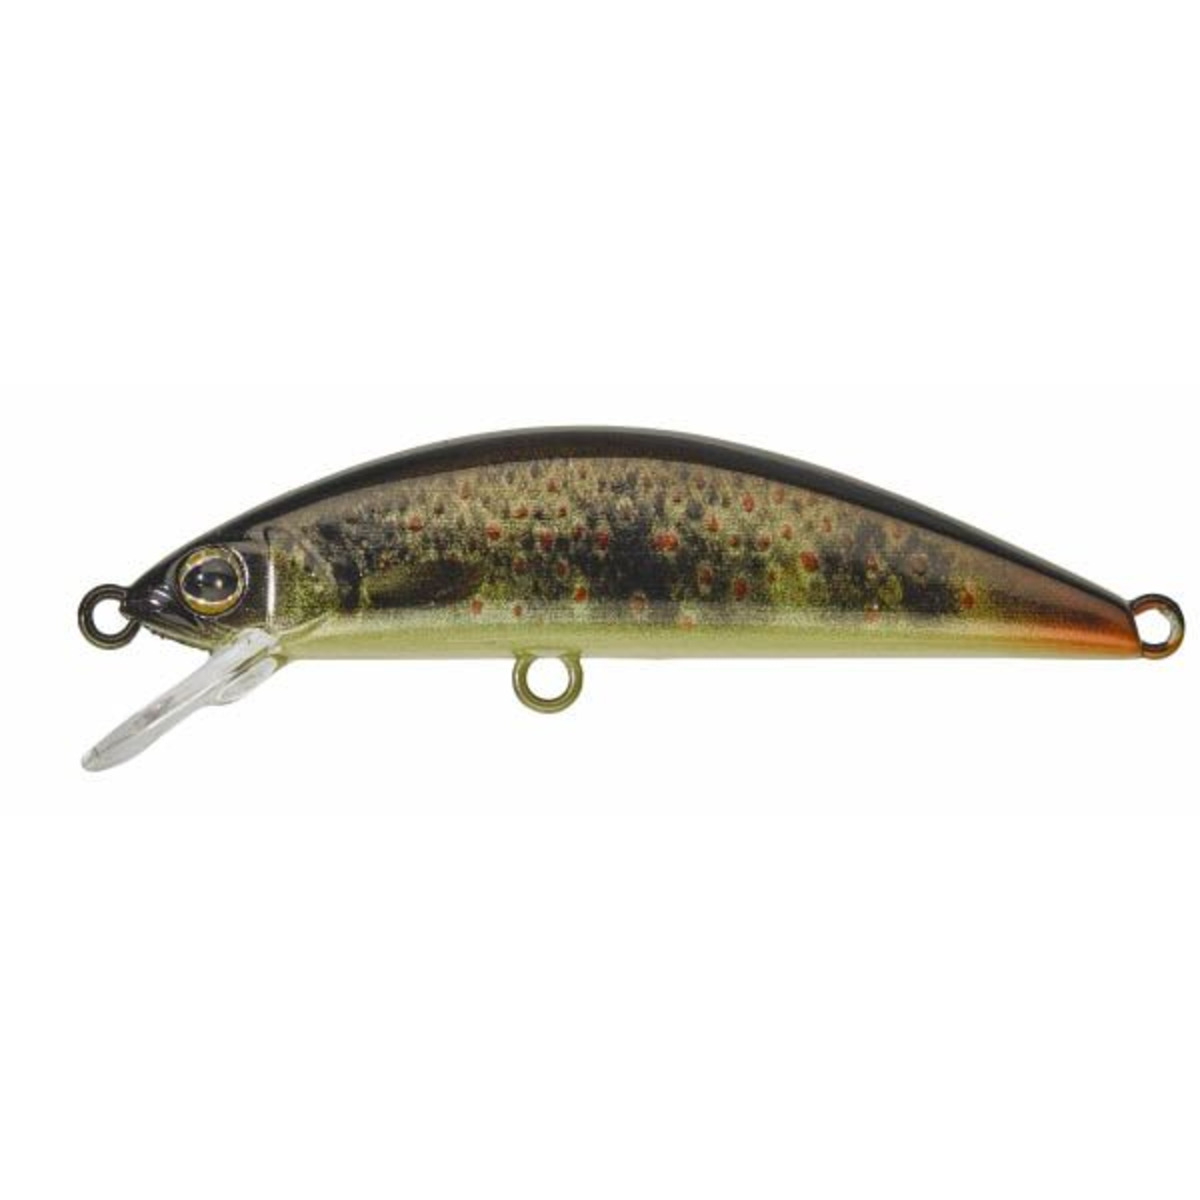 Illex Tricoroll 55 Sp - 55 mm - 3.2 g - Rt Brown Trout